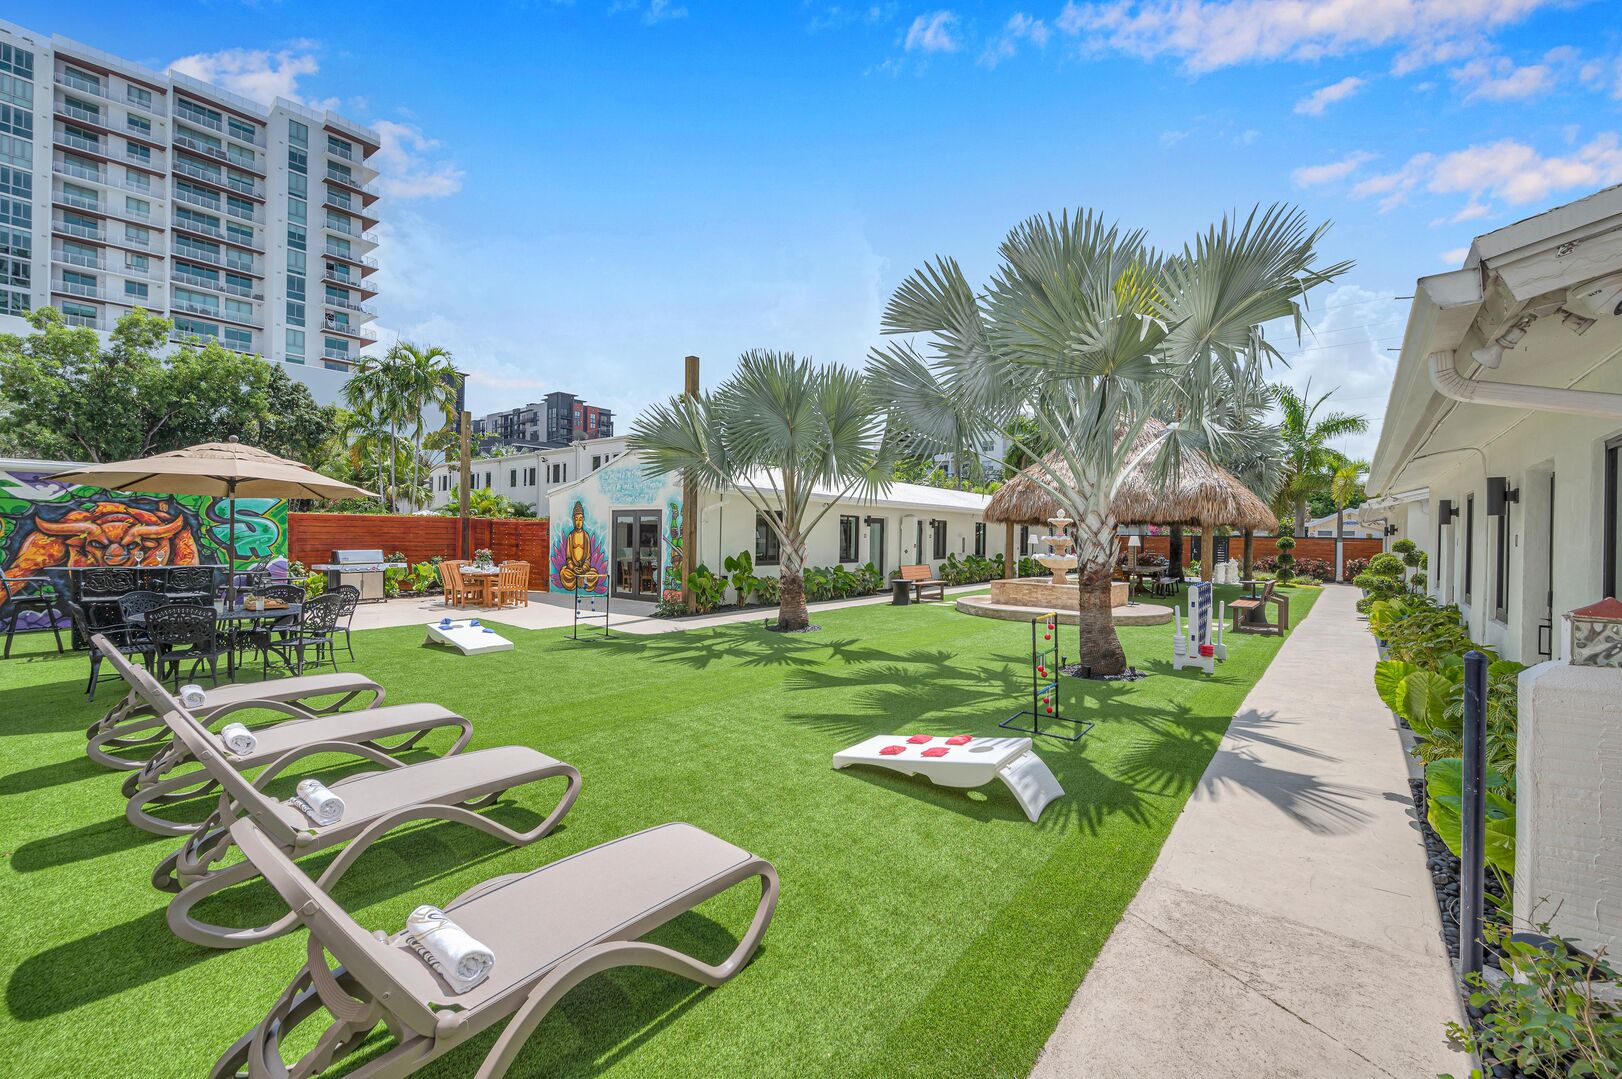 Suite One is one of seven suites surrounding a garden that features wall murals, a tiki gazebo, a giant chess board, mini golf, a hot tub, a grill, as well as many lounging and dining areas.